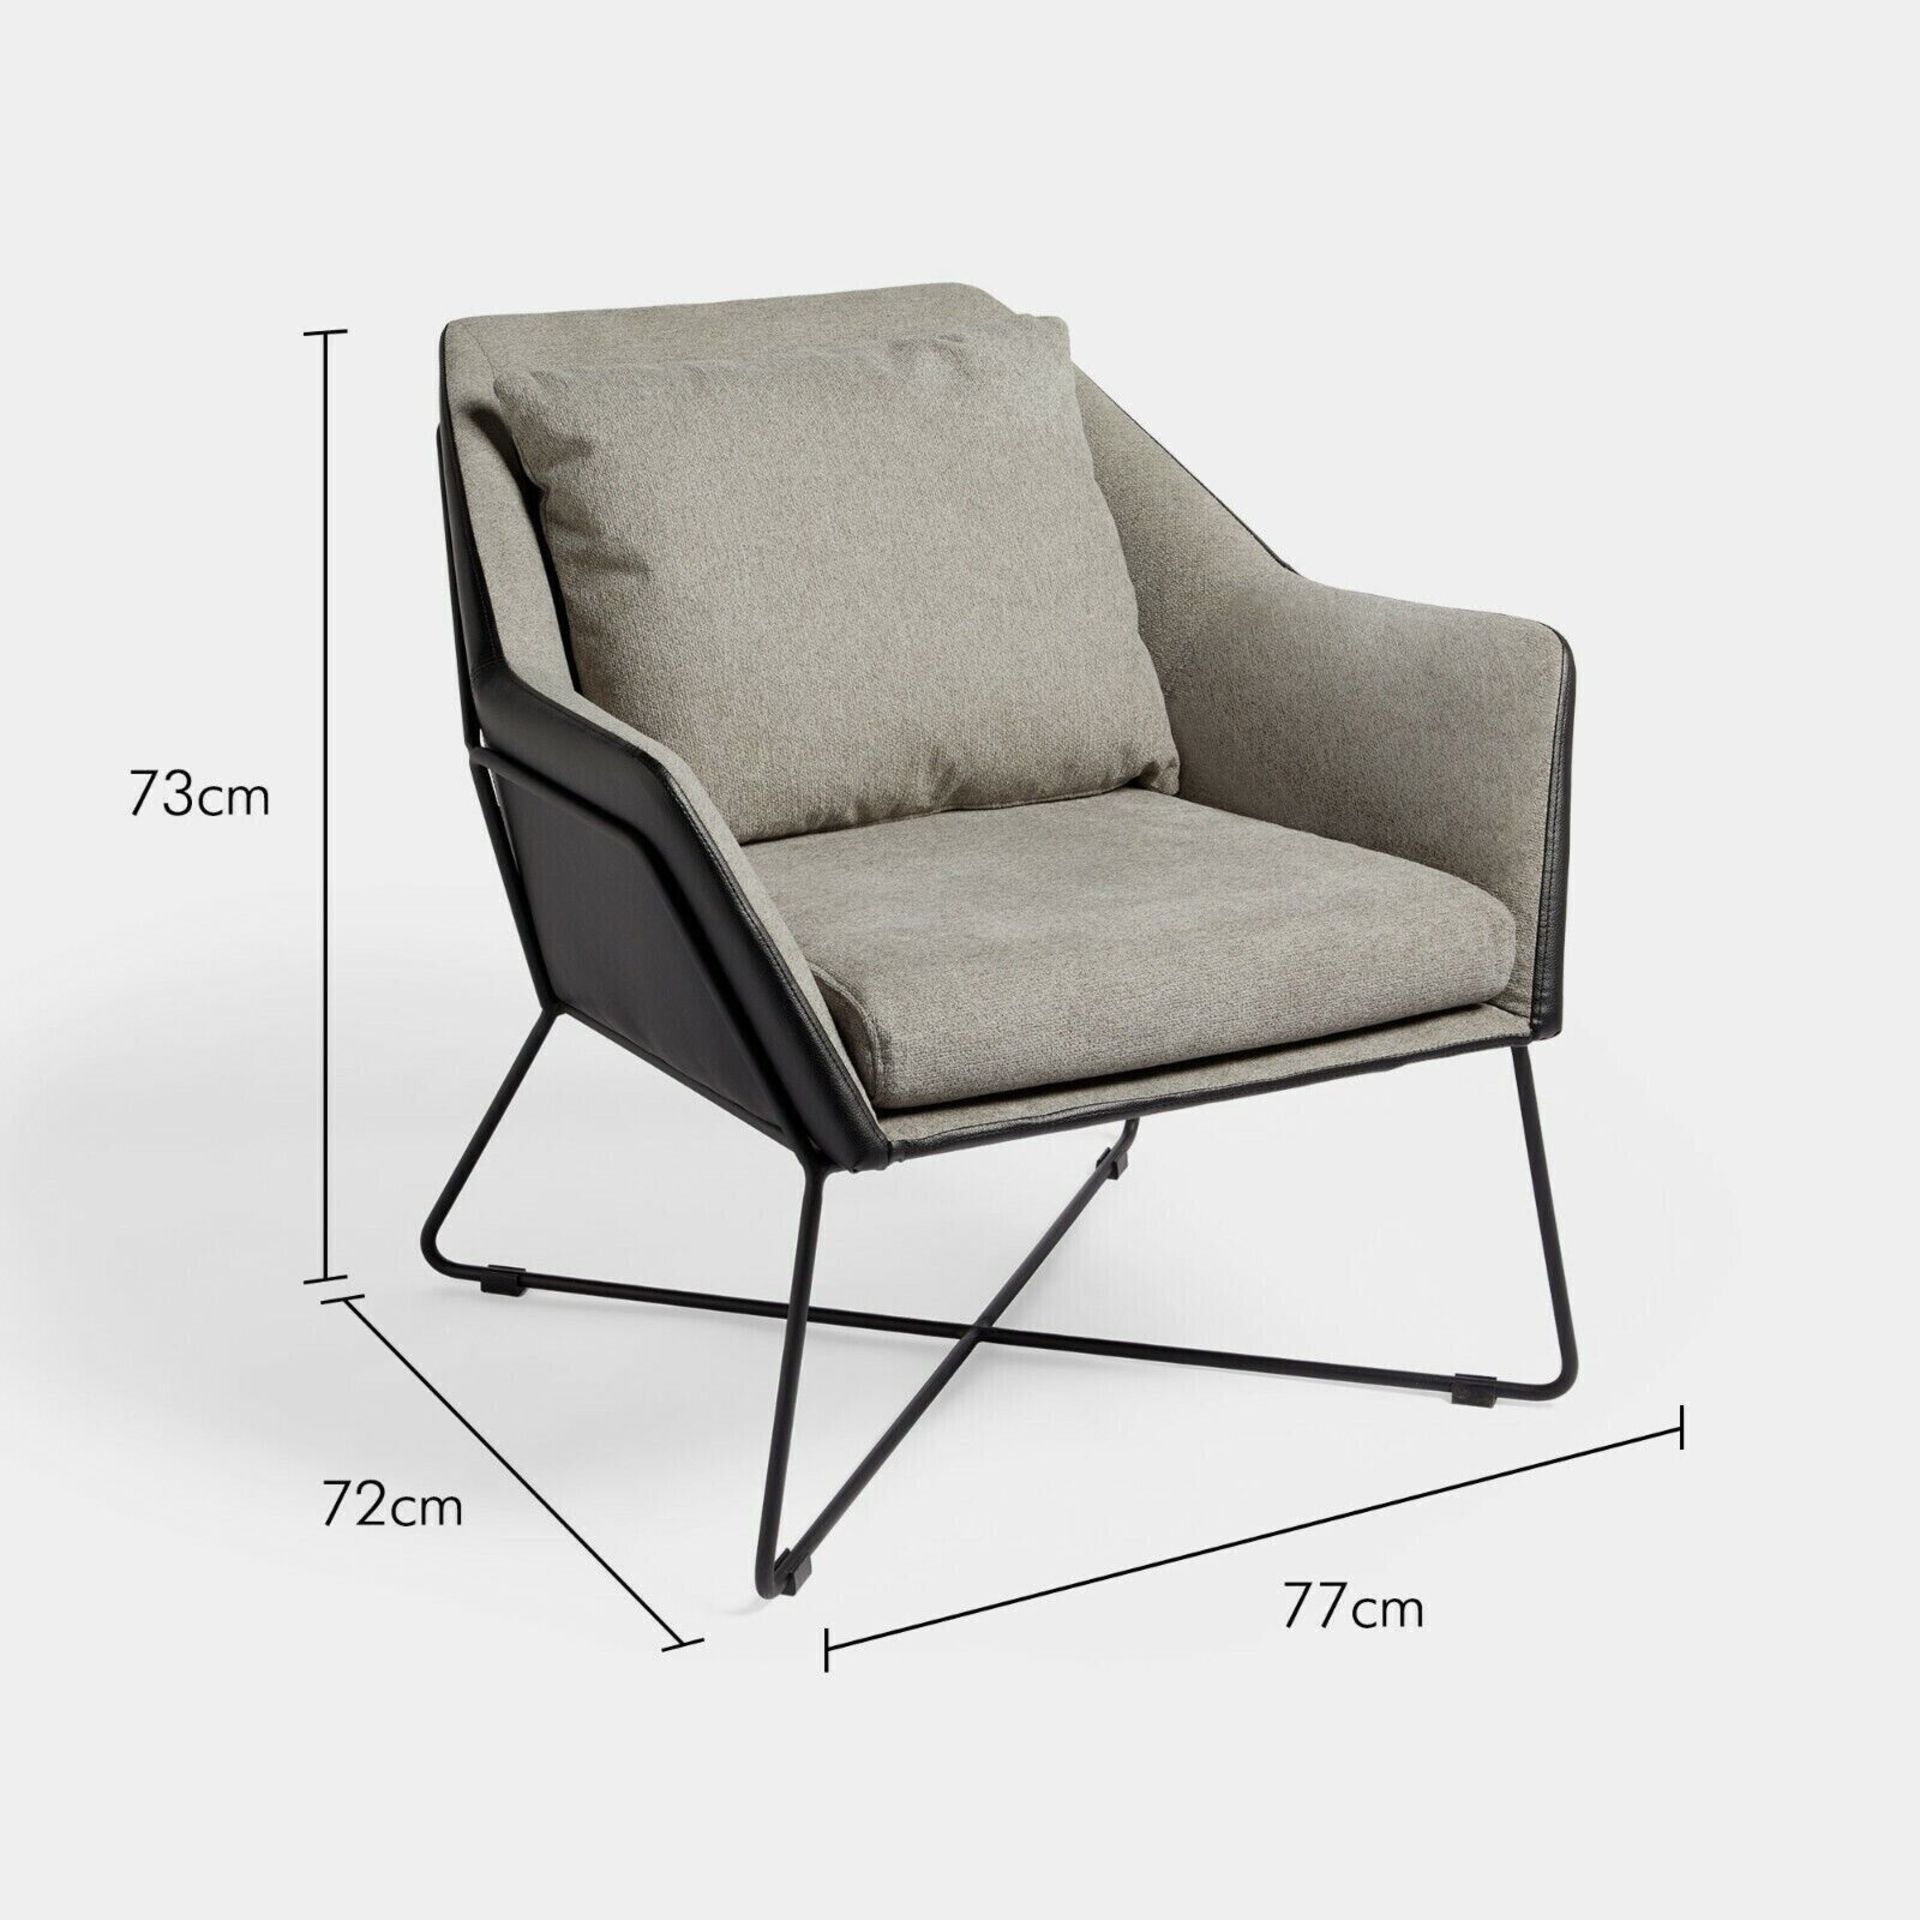 NEW & BOXED Grey & Black Framed Armchair. RRP £214. (181). MODERN STYLING – Finished off with a - Image 3 of 3